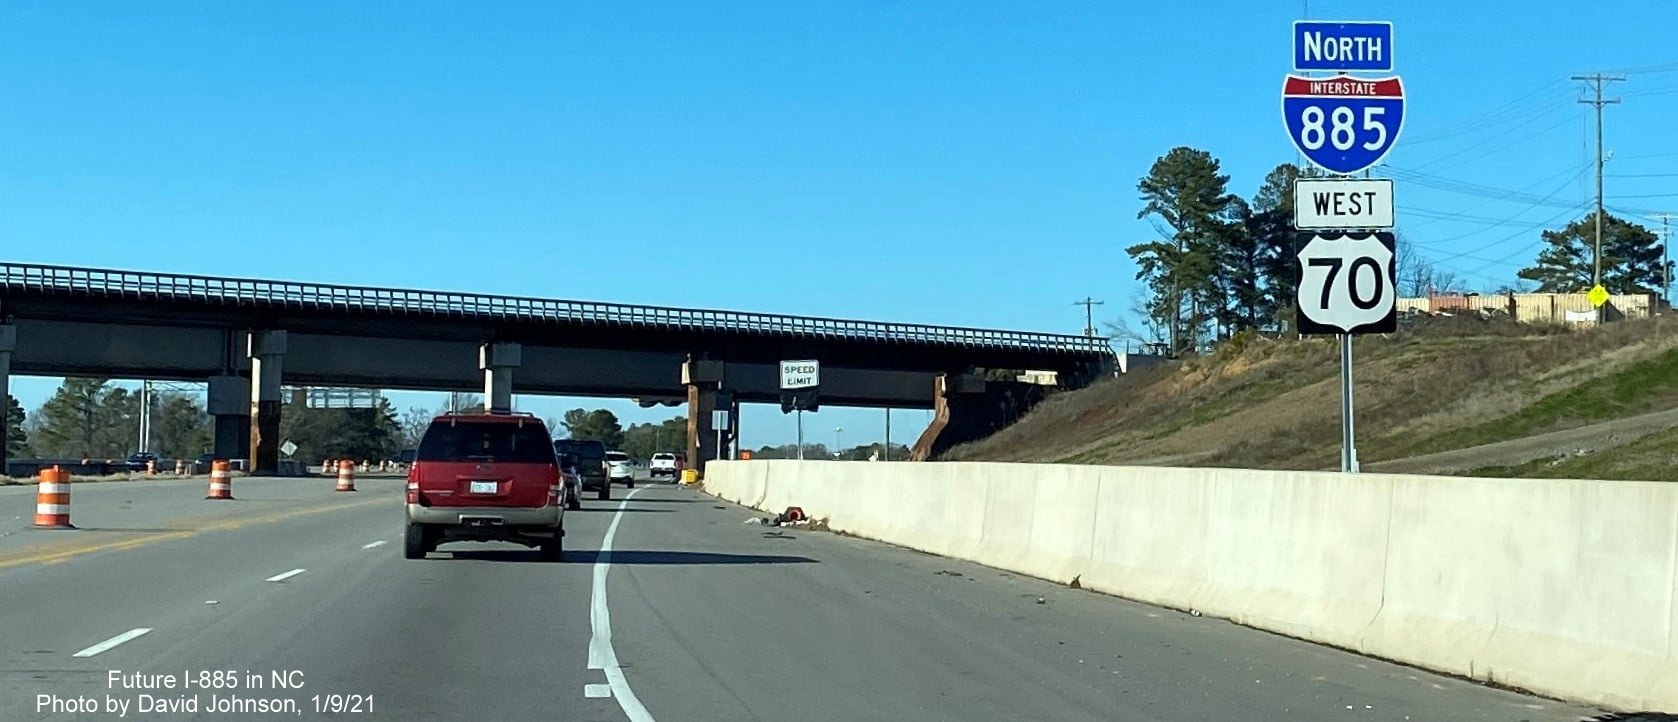 Image of newly placed I-885 North/US 70 West reassurance marker prior to railroad bridge in Durham, by David Johnson, January 2021